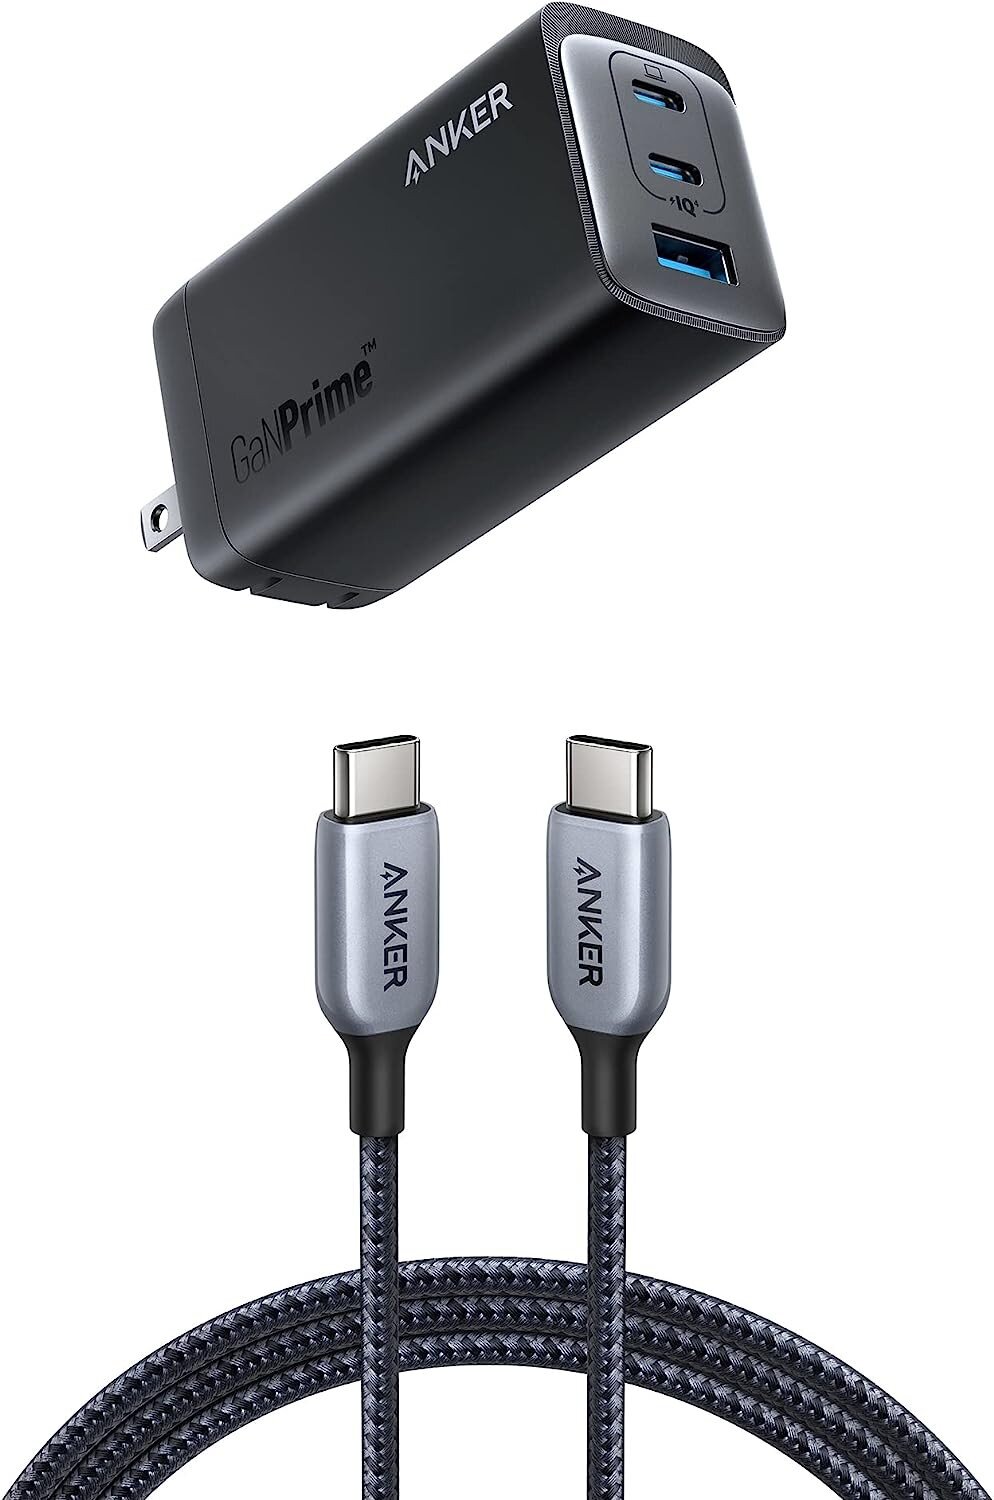 Buy Anker 737 Charger (GaNPrime 120W) with USB-C to USB-C Cable